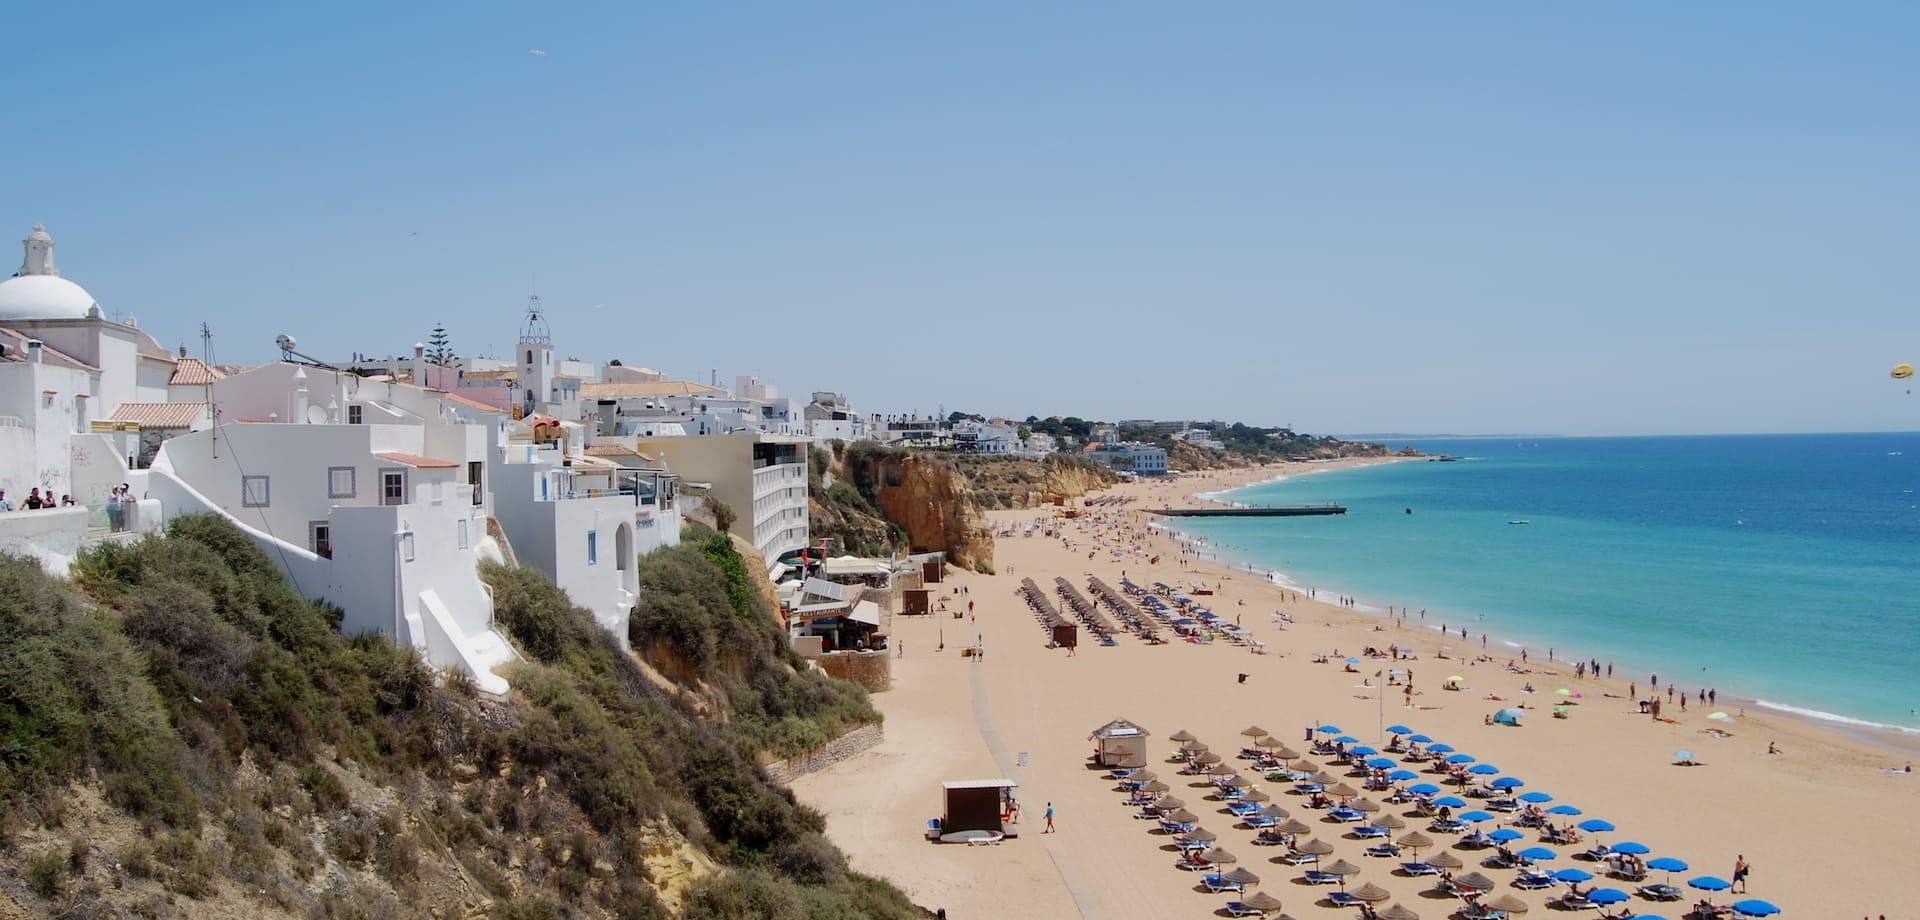 Village of Albufeira has become one of Portugal’s most popular destinations.